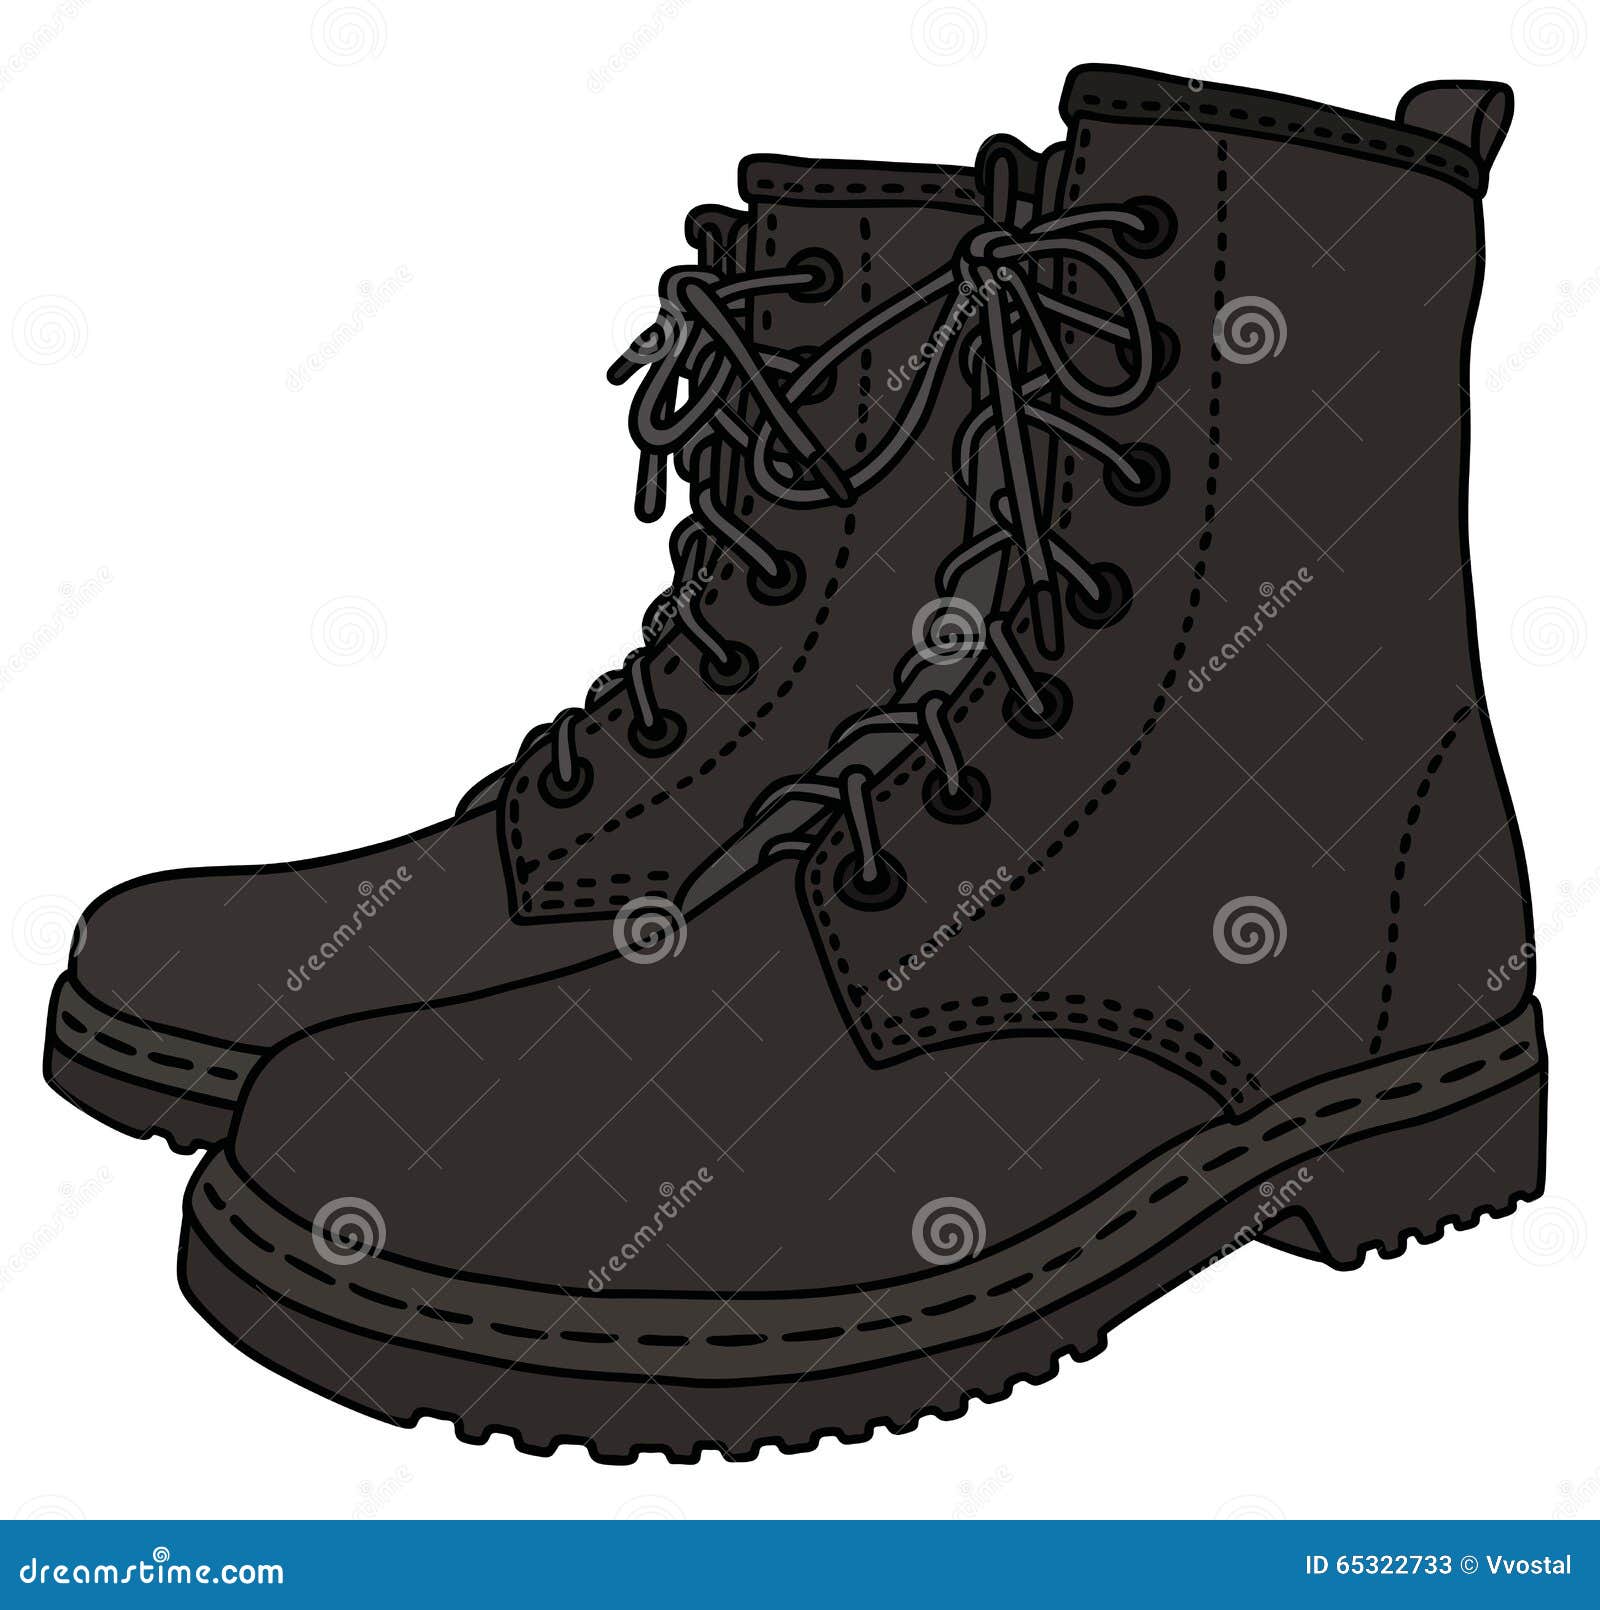 Black leather boots stock vector. Illustration of army - 65322733